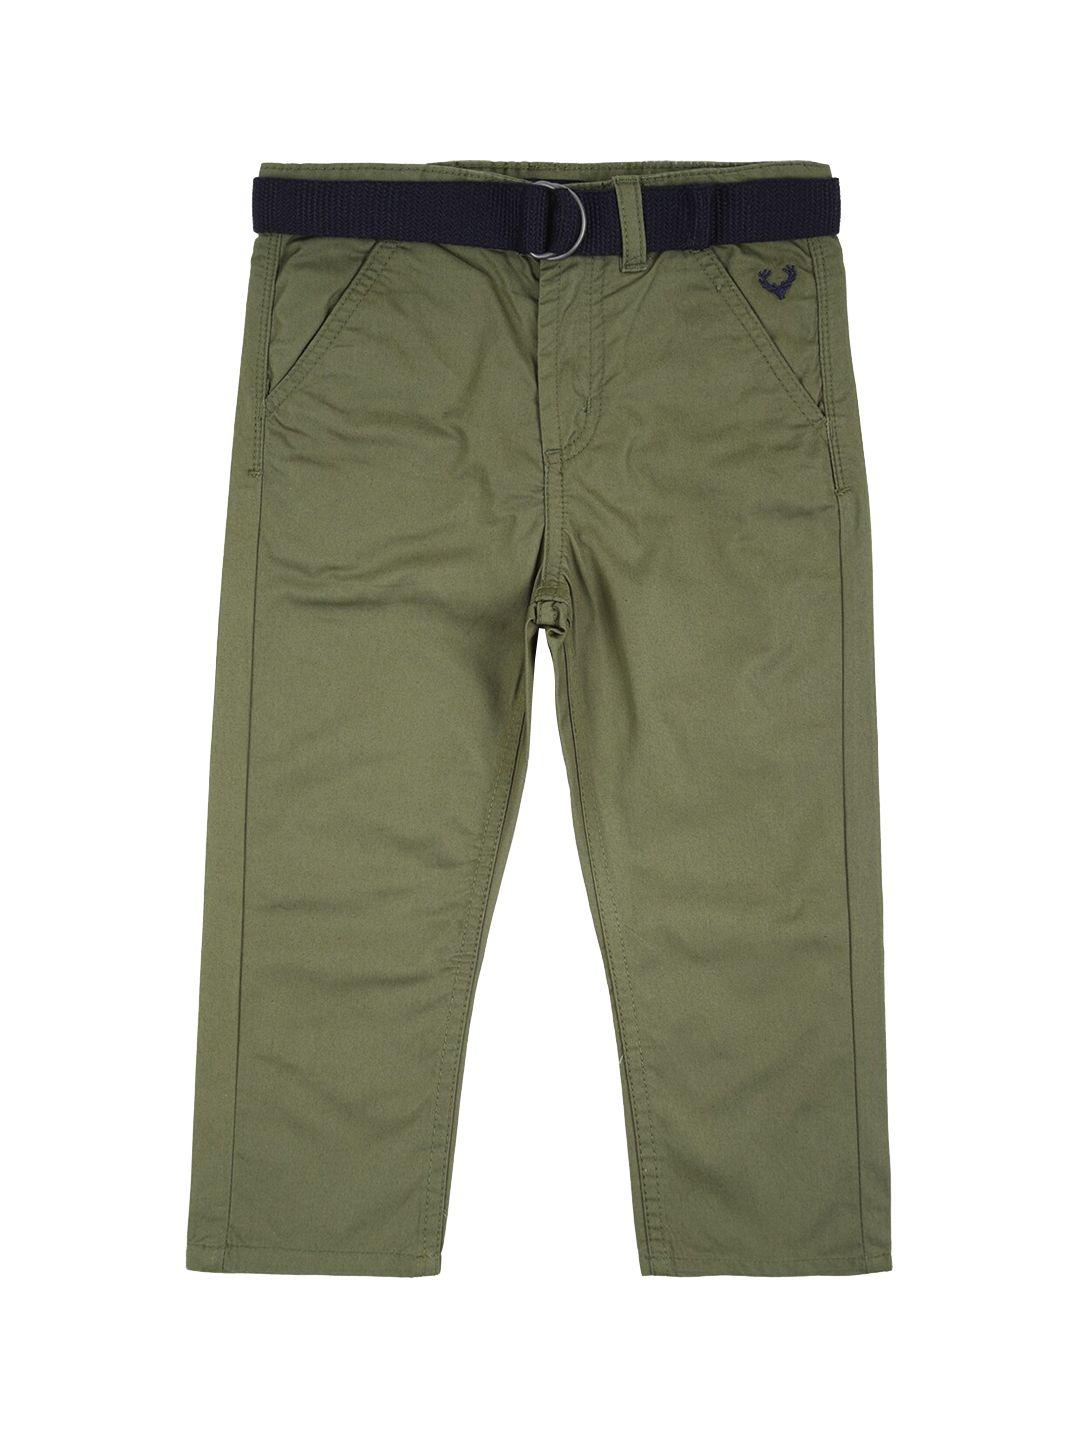 allen solly junior boys olive green slim fit trousers